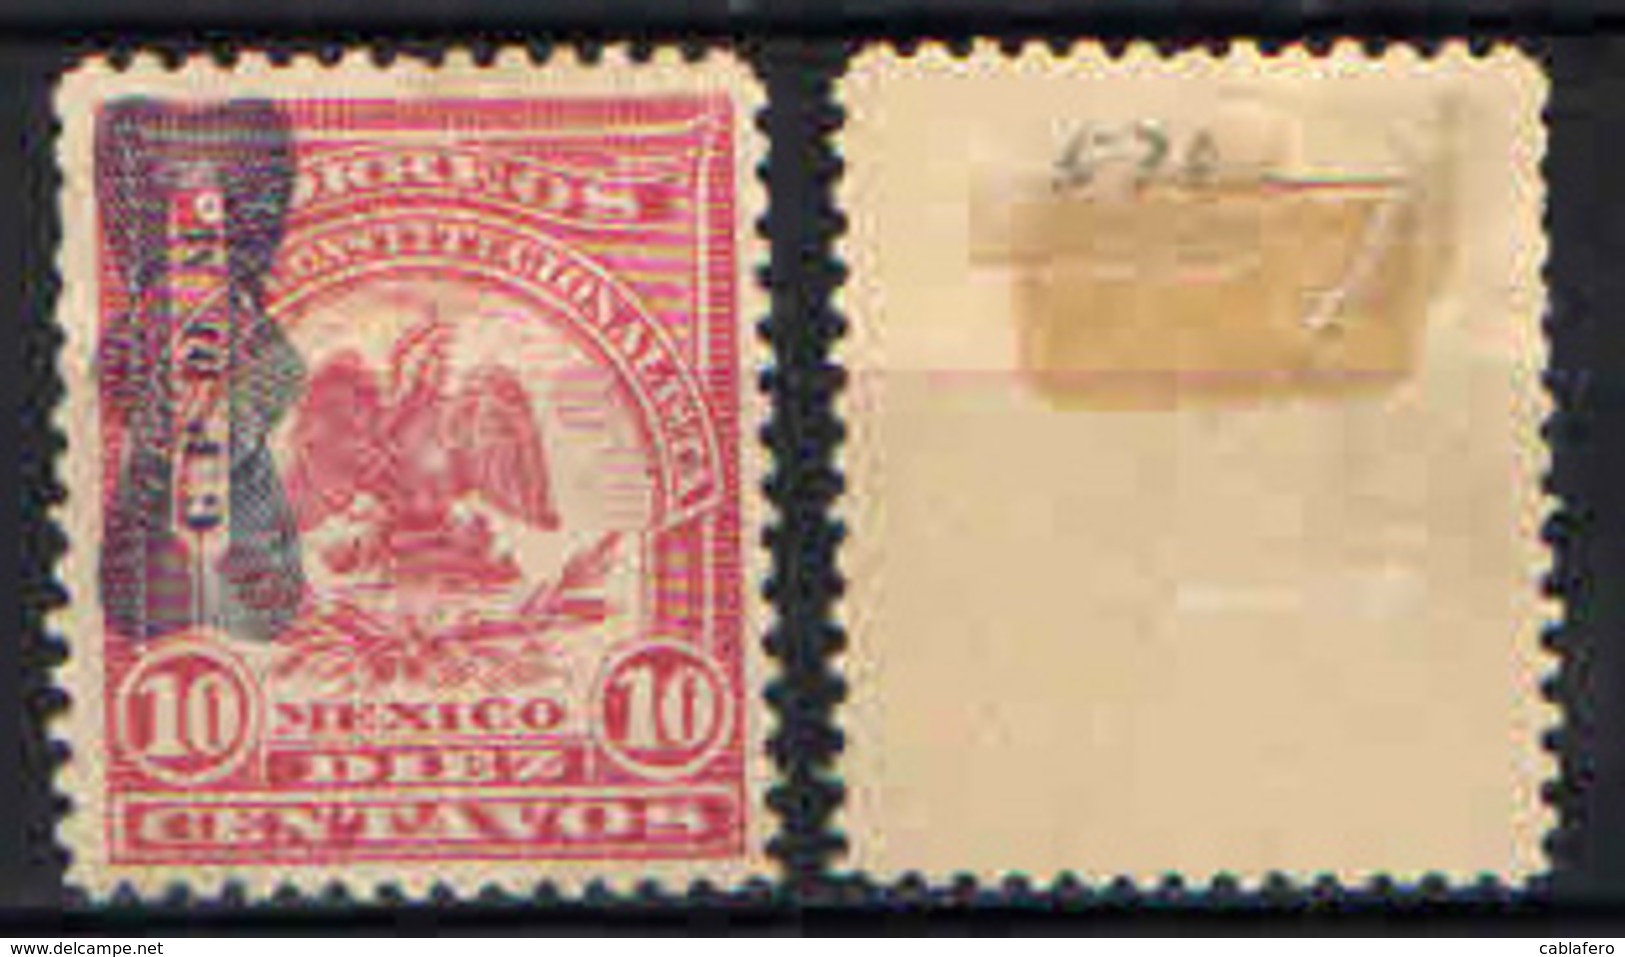 MESSICO - 1916 - Coat Of Arms - OVERPRINTED - MH - Mexique